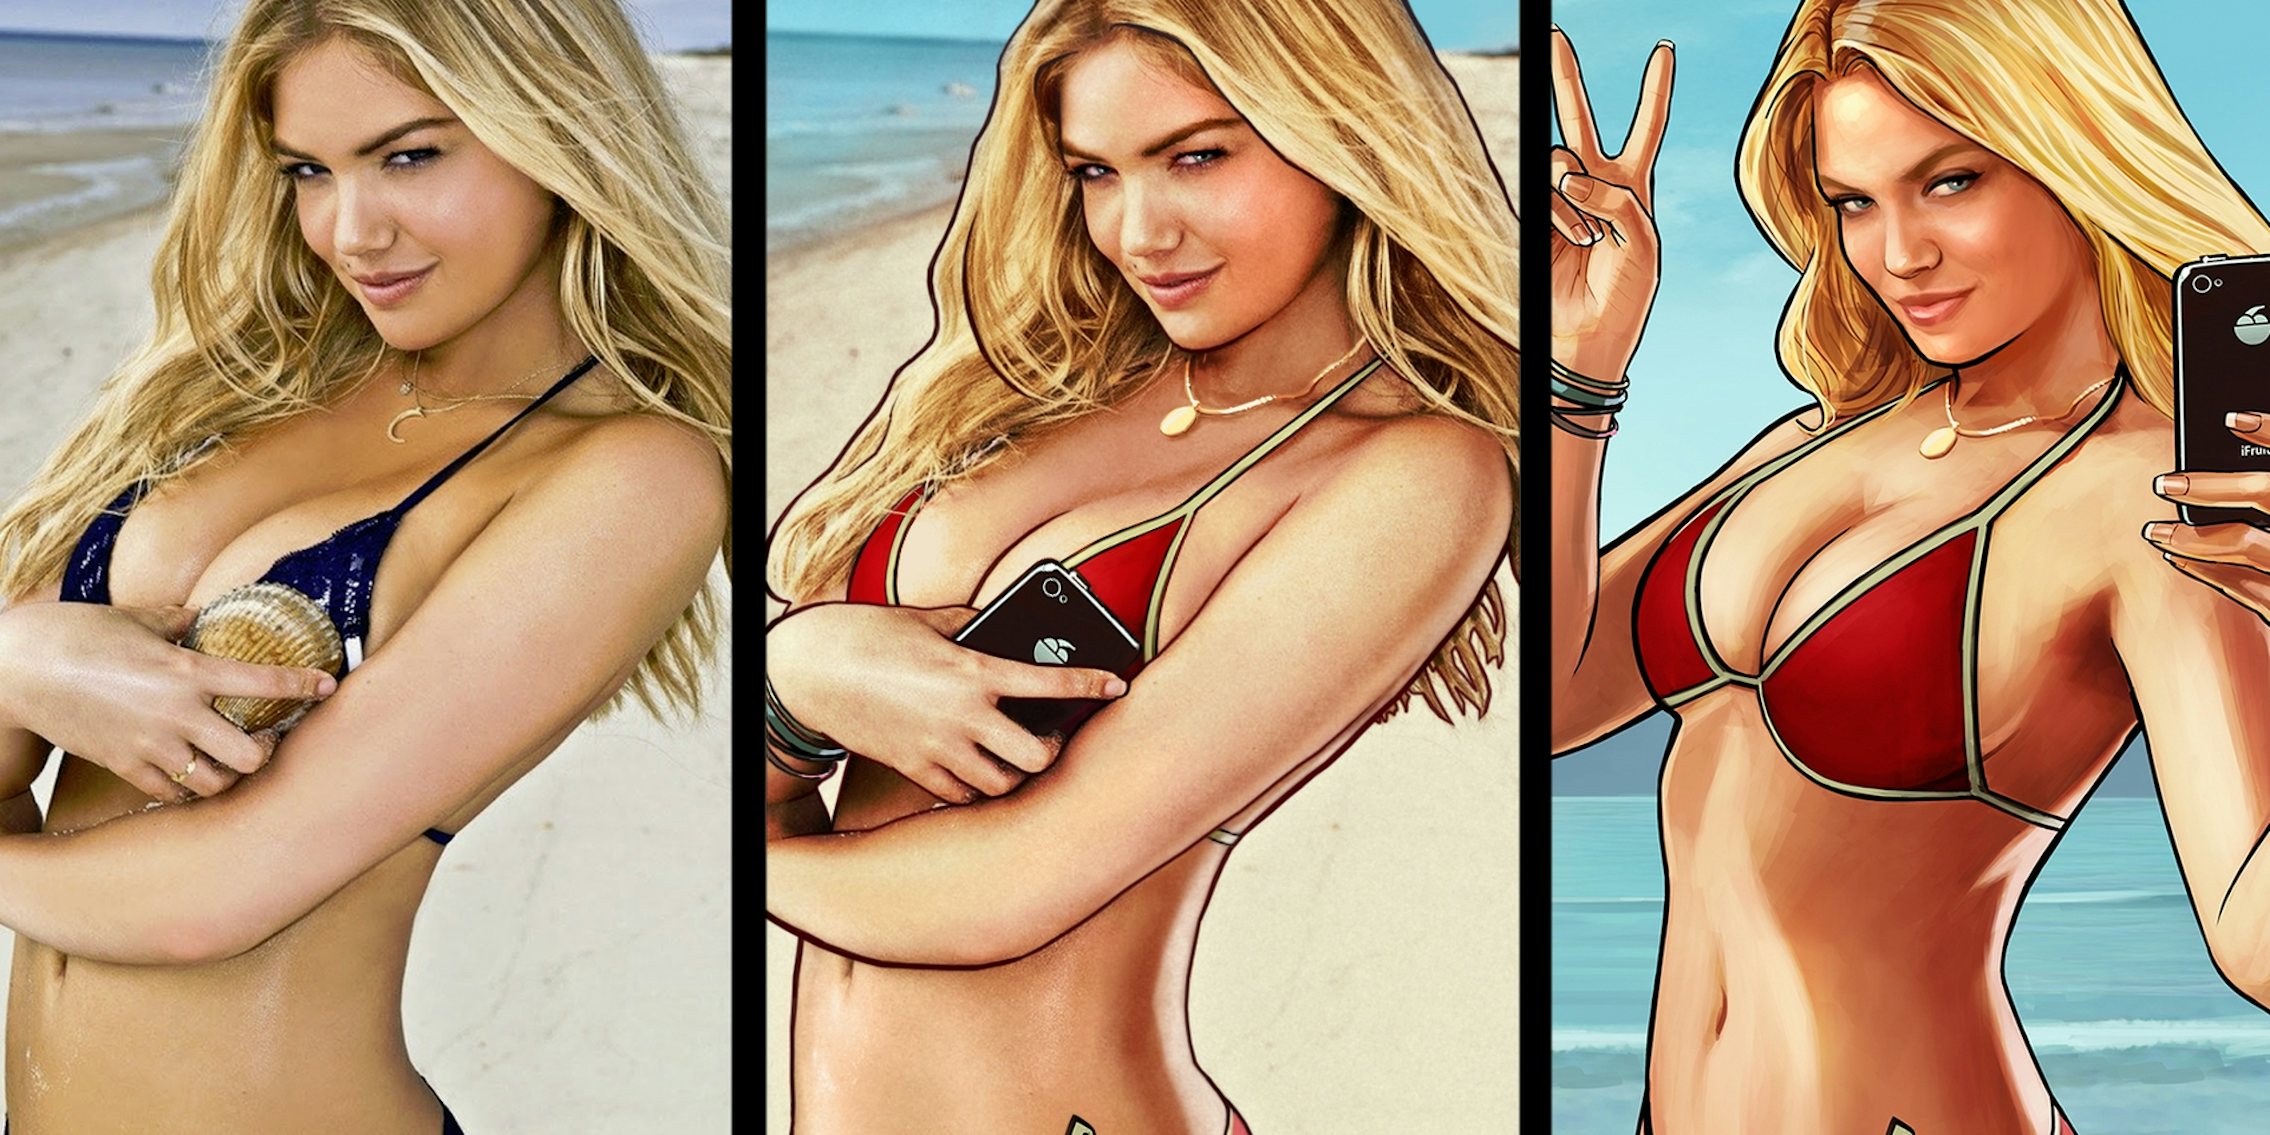 That's not Kate Upton in the 'Grand Theft Auto V' adsâ€”it's this model